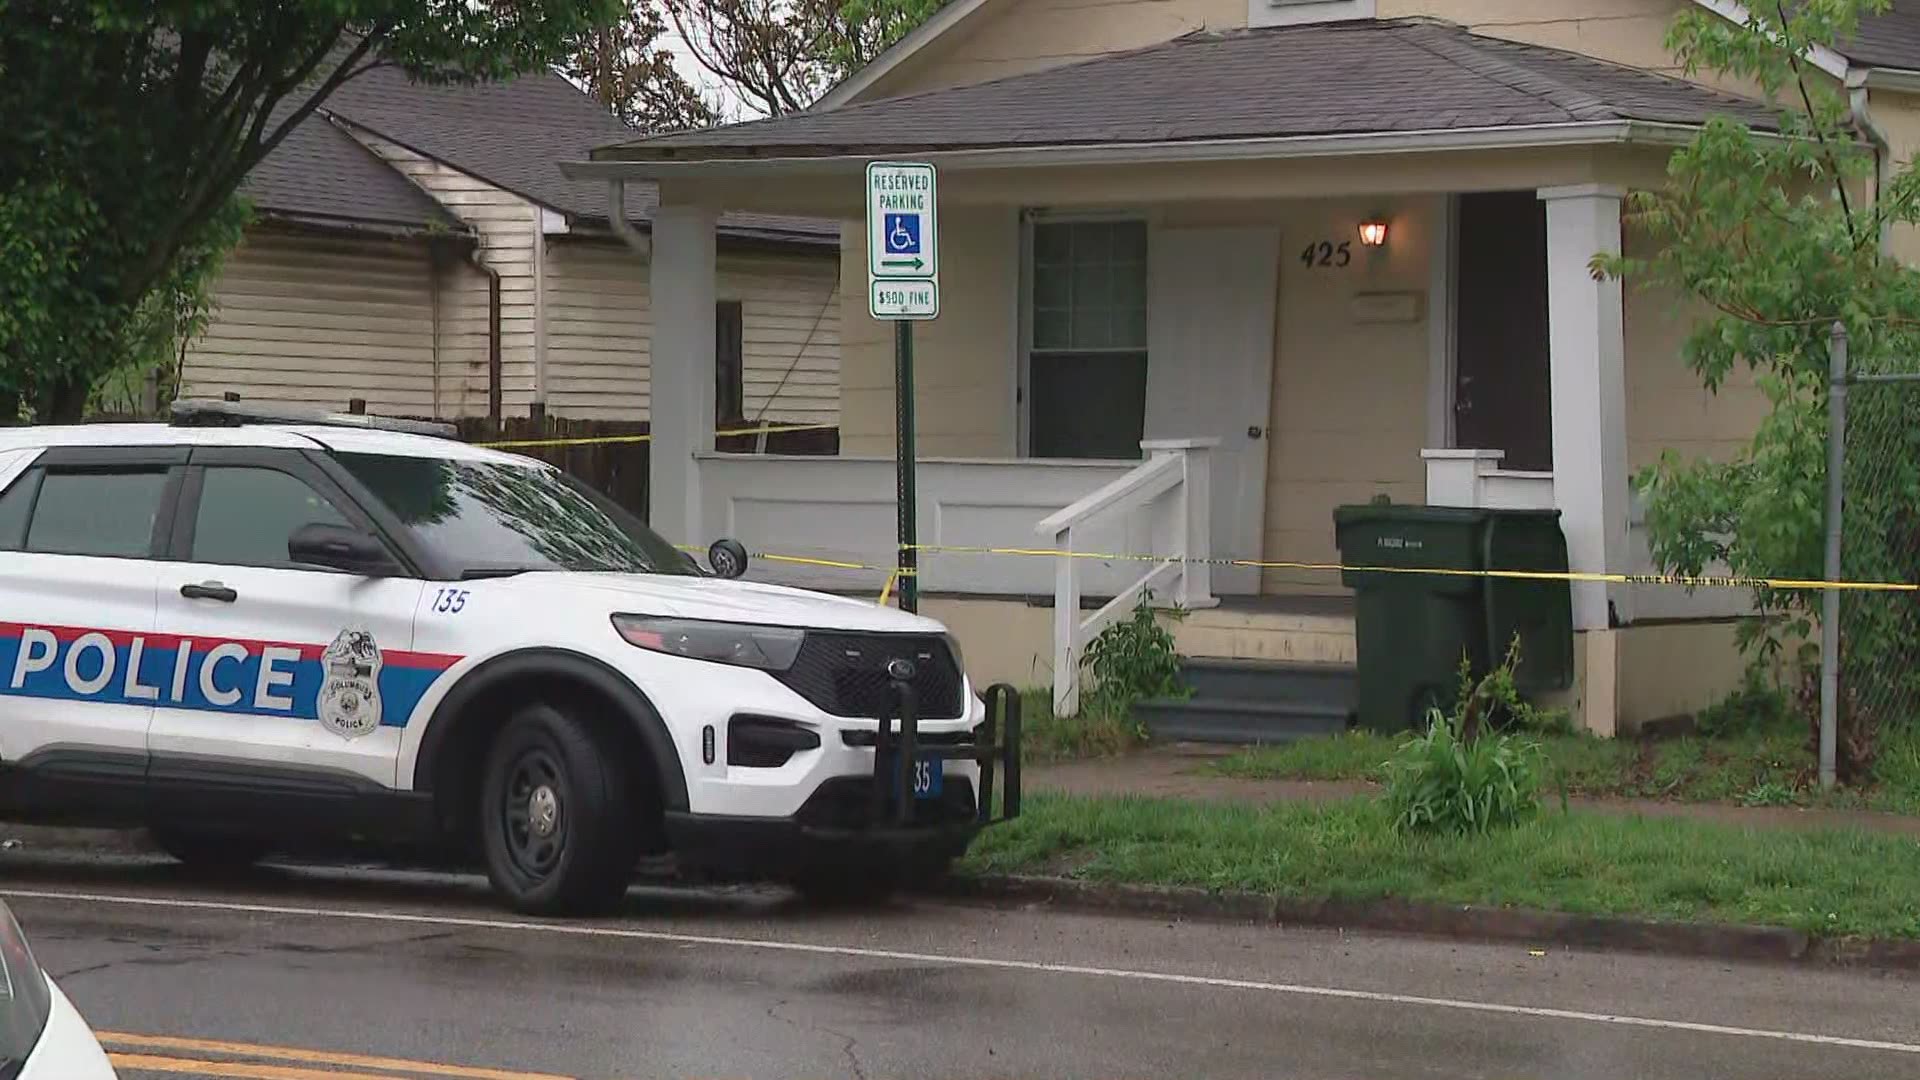 Two people were found inside with apparent gunshot wounds.